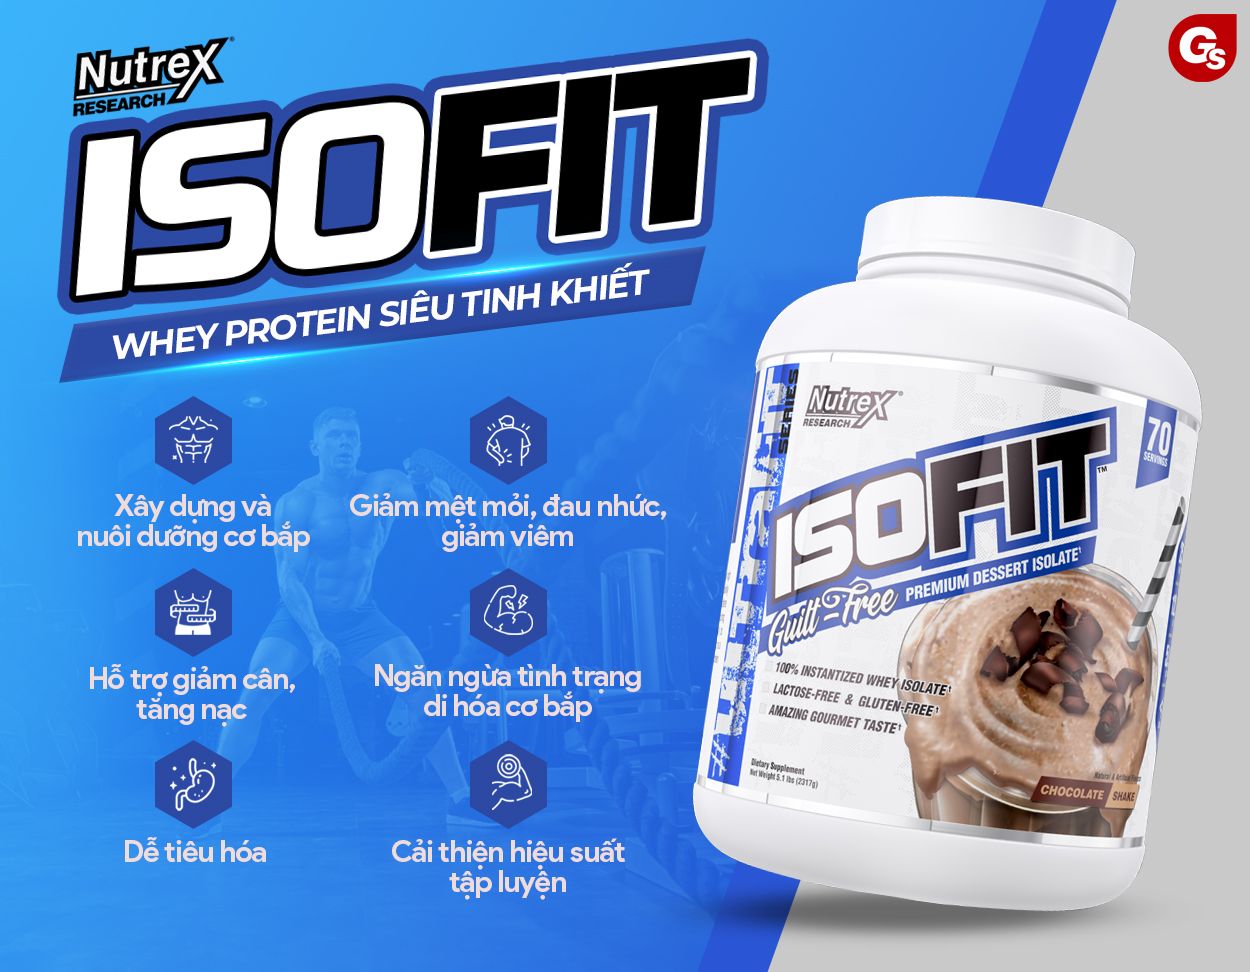 cong-dung-cua-nutrex-isofit-gymstore